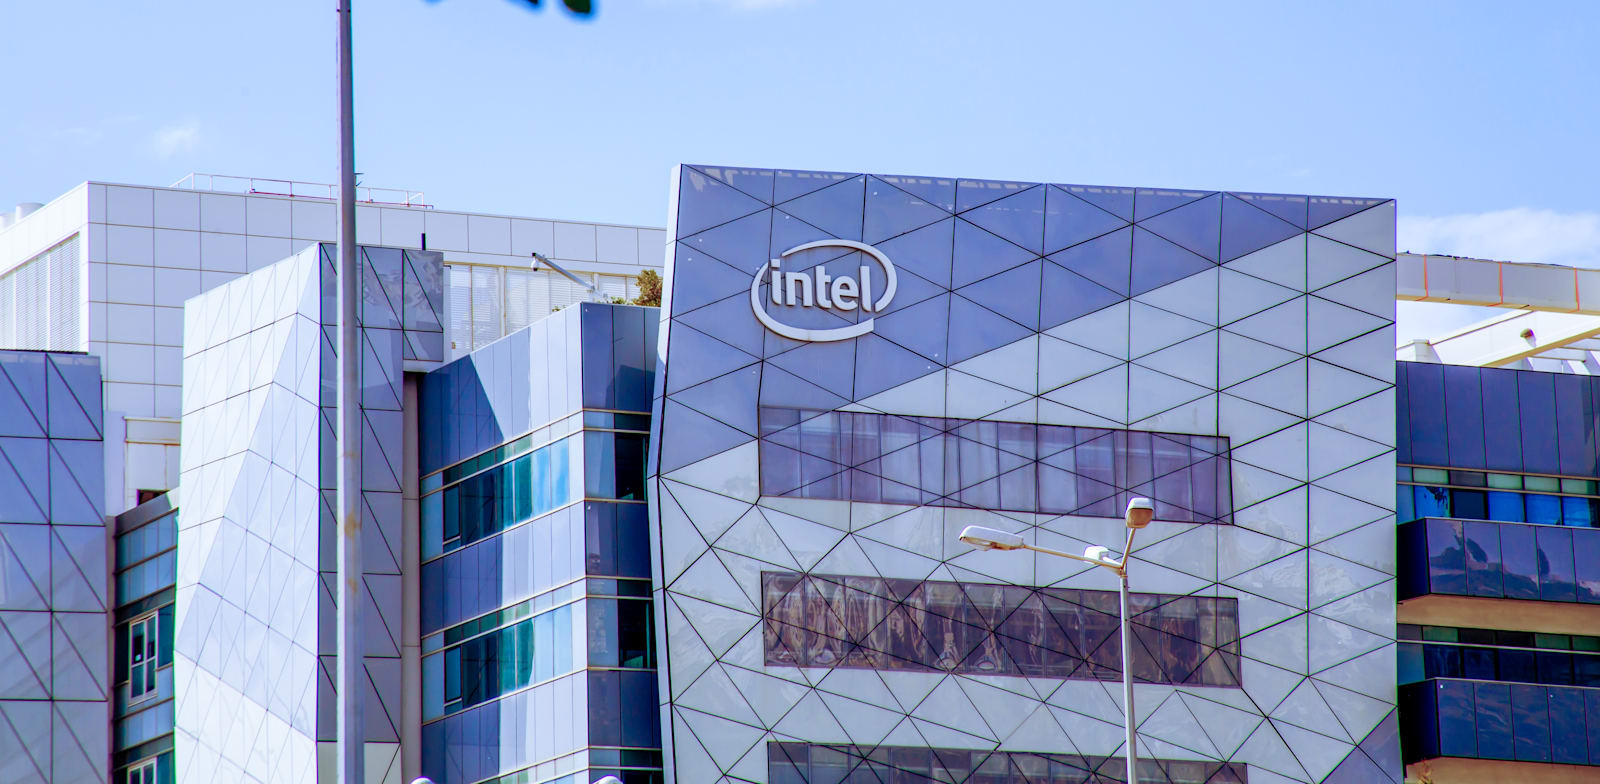 Intel is expected to embark on another wave of layoffs, also in Israel